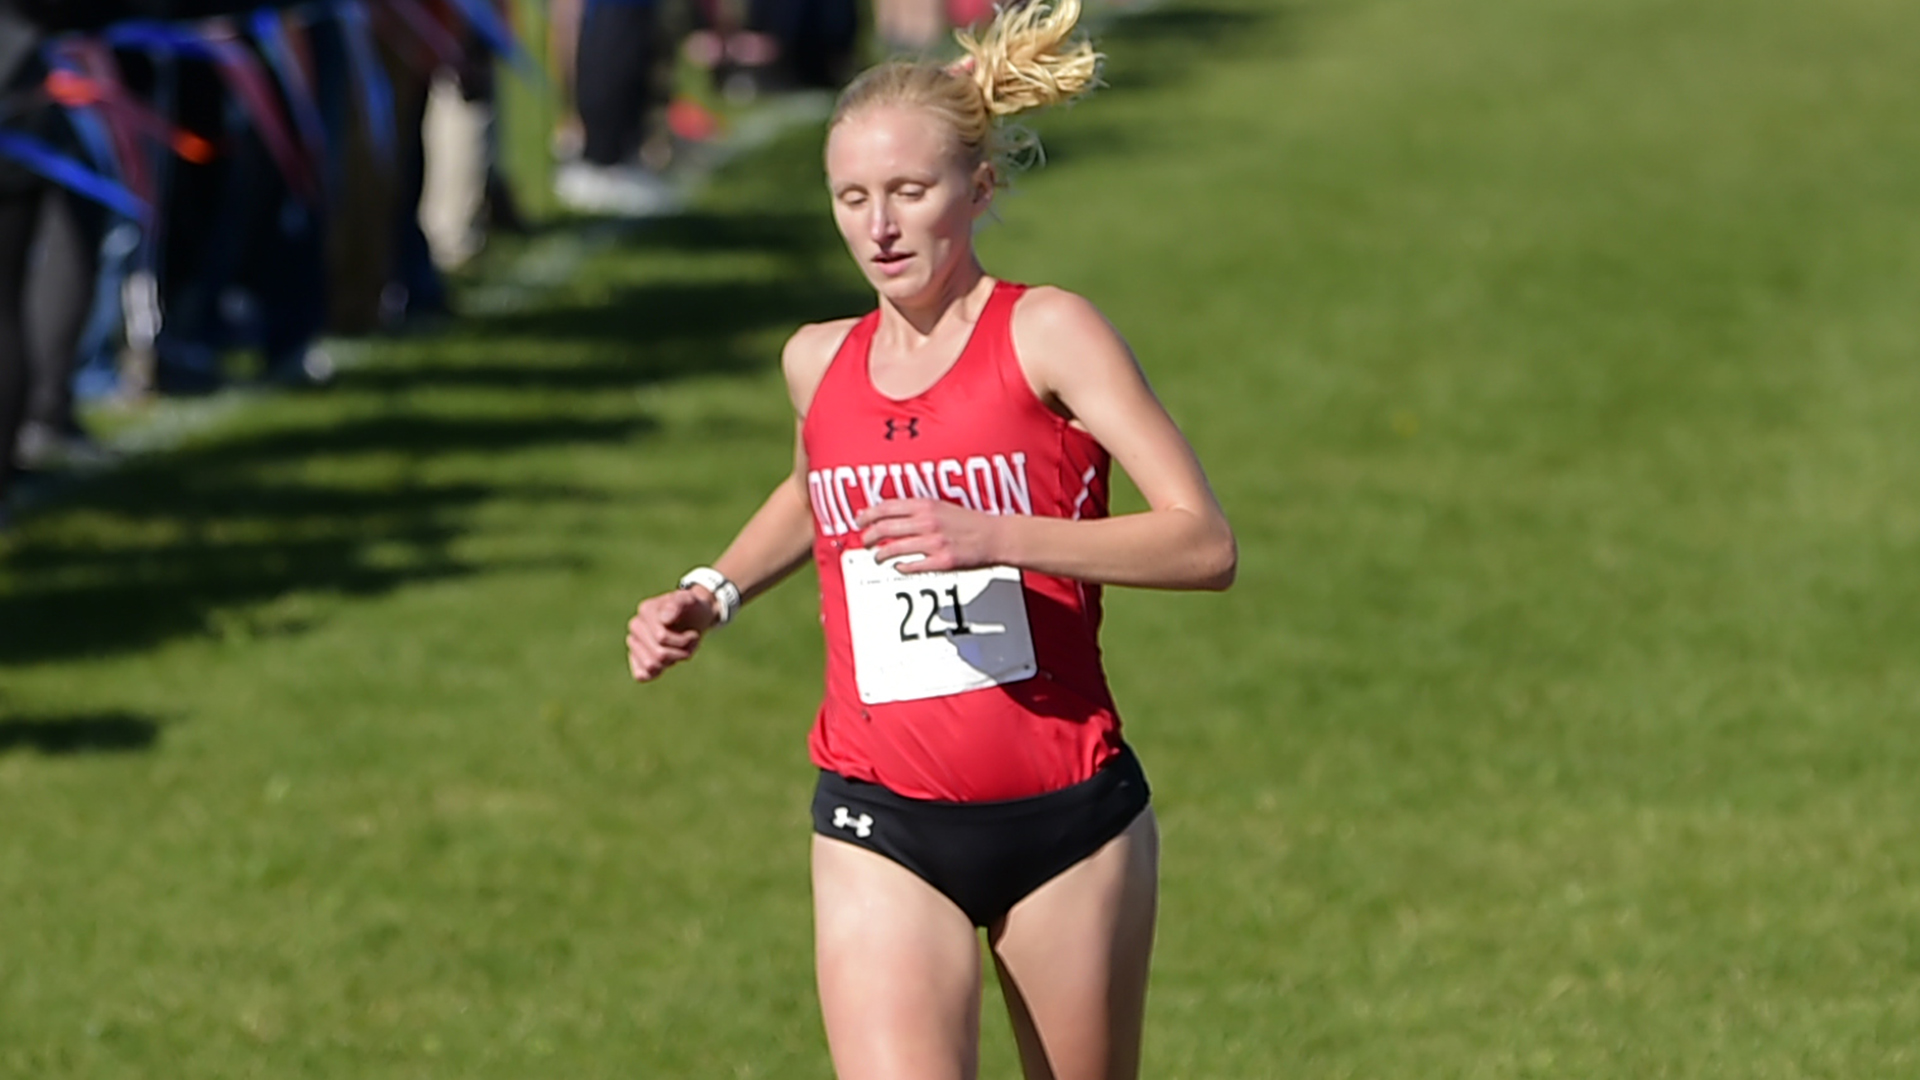 Isabel Cardi, Dickinson, Runner of the Year